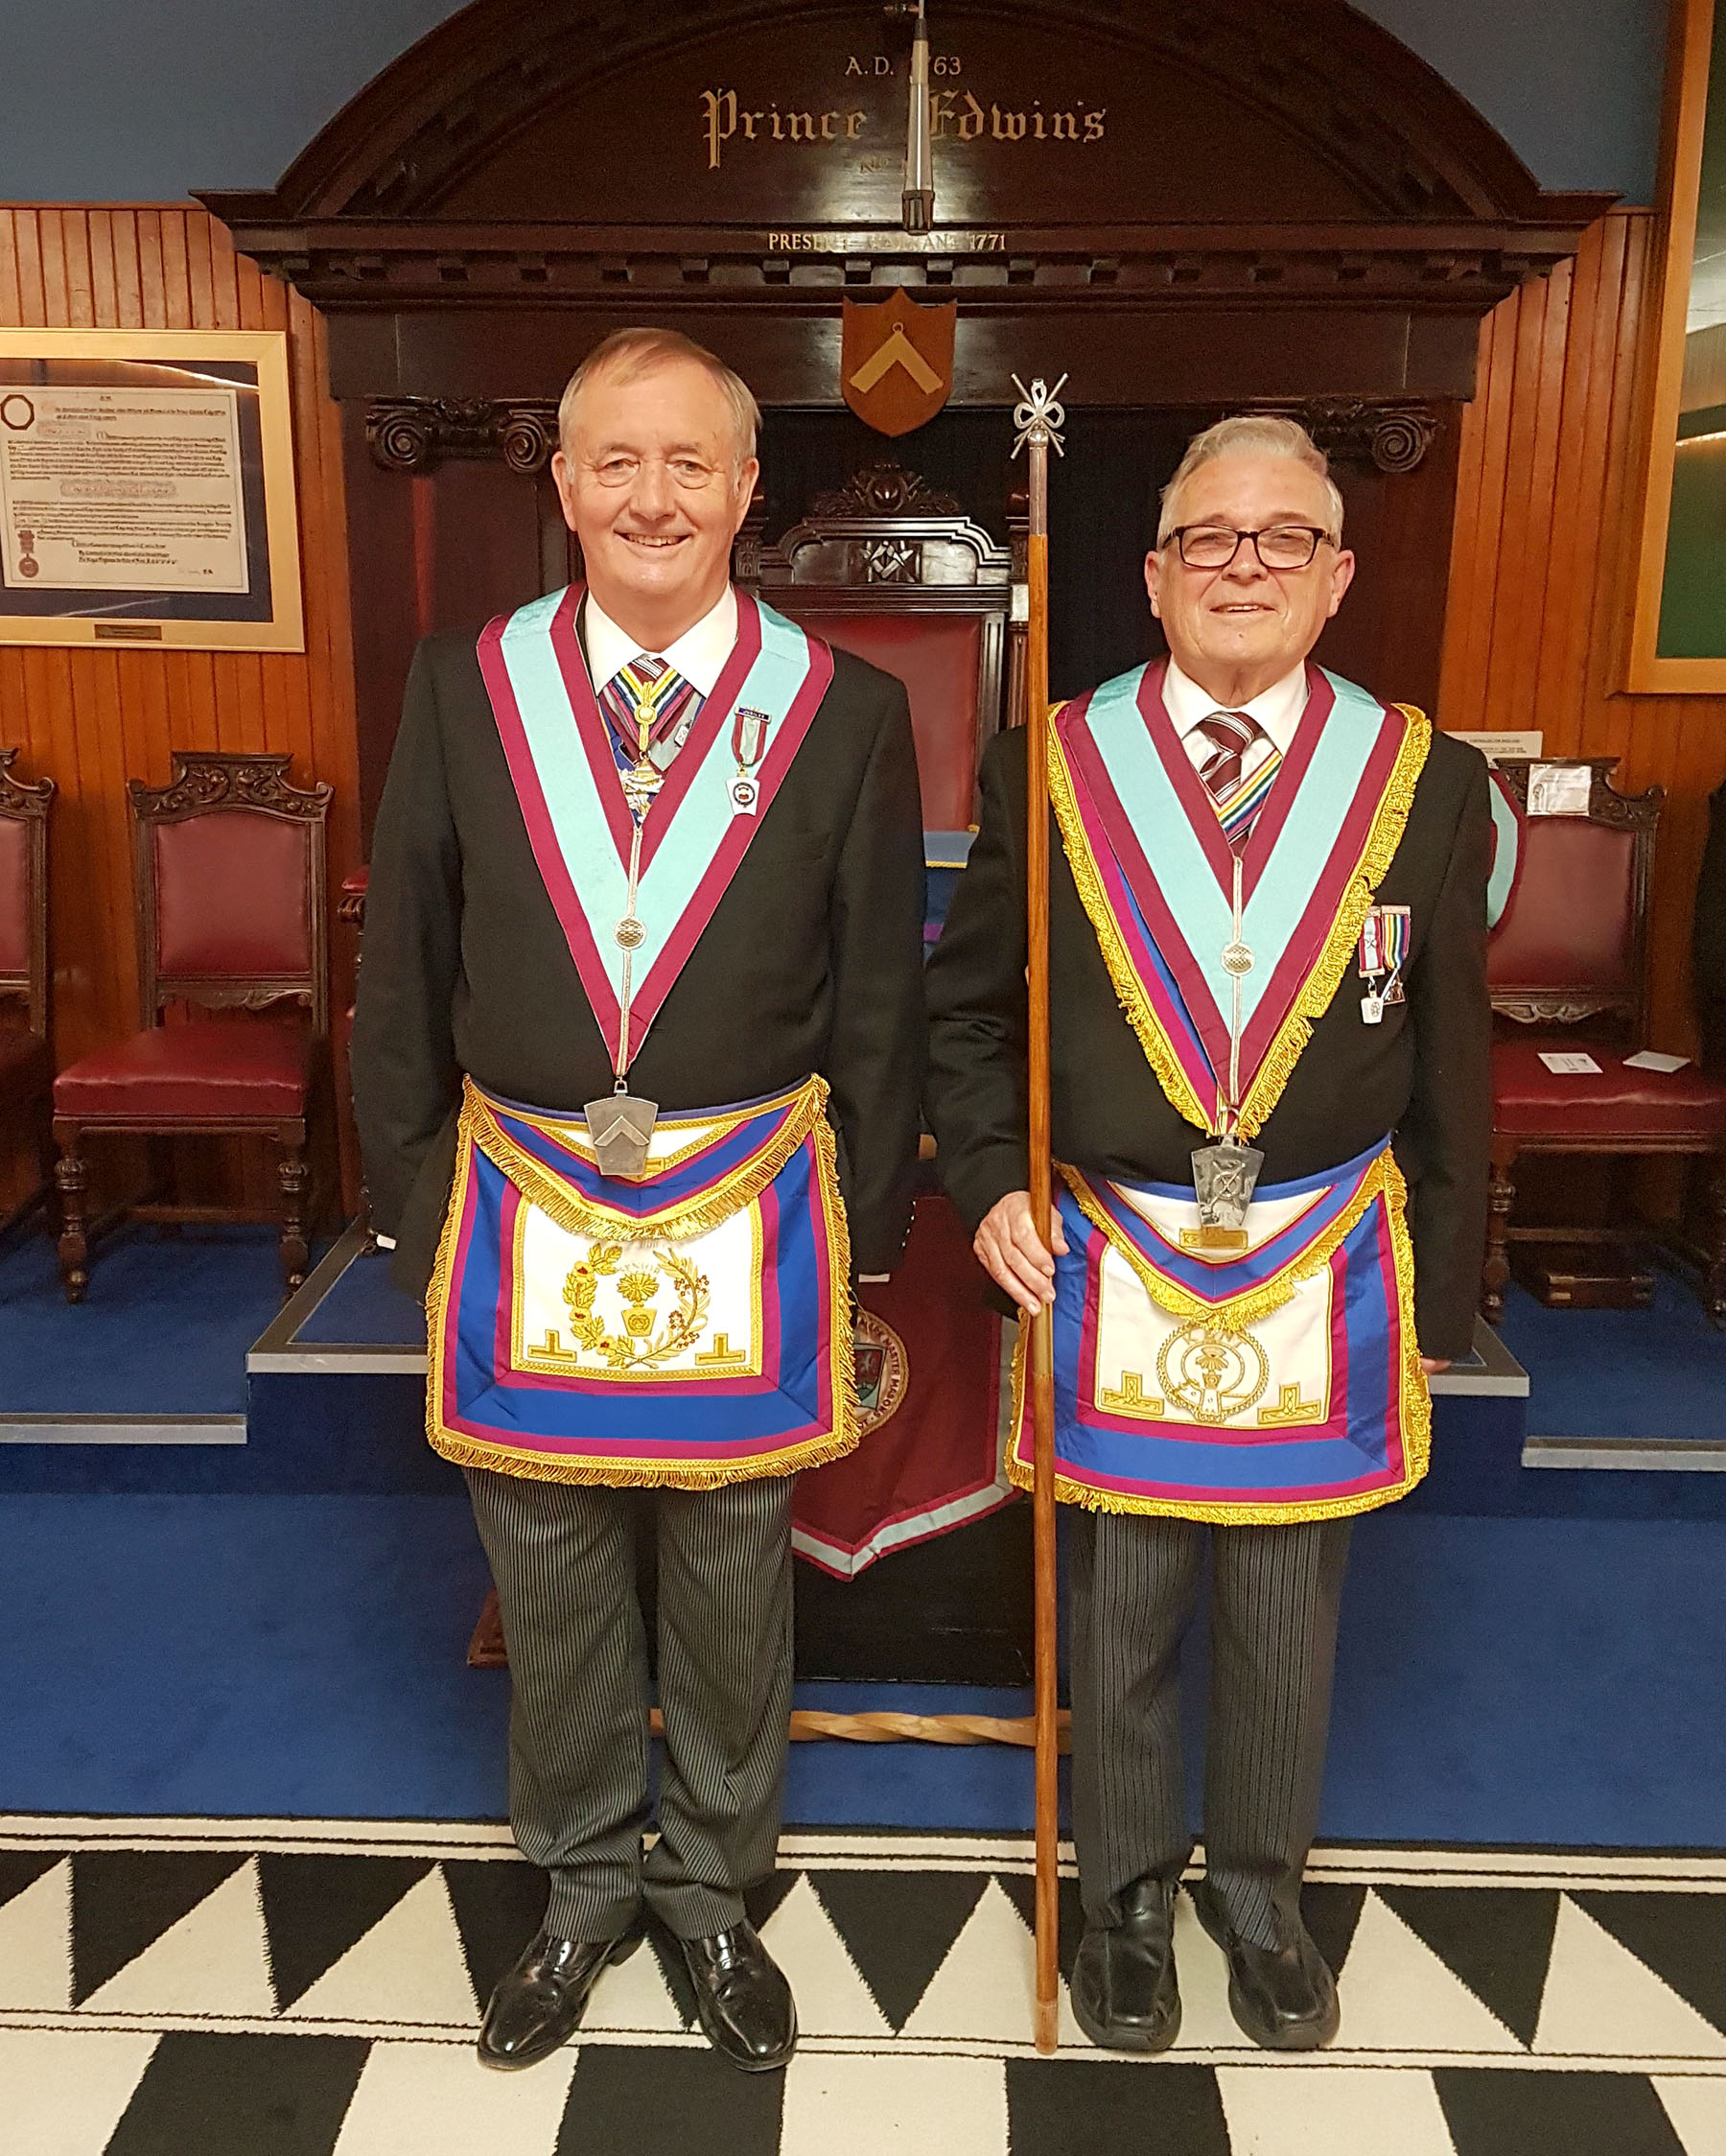 The Deputy Grand Master and the District Grand Secretary celebrate together